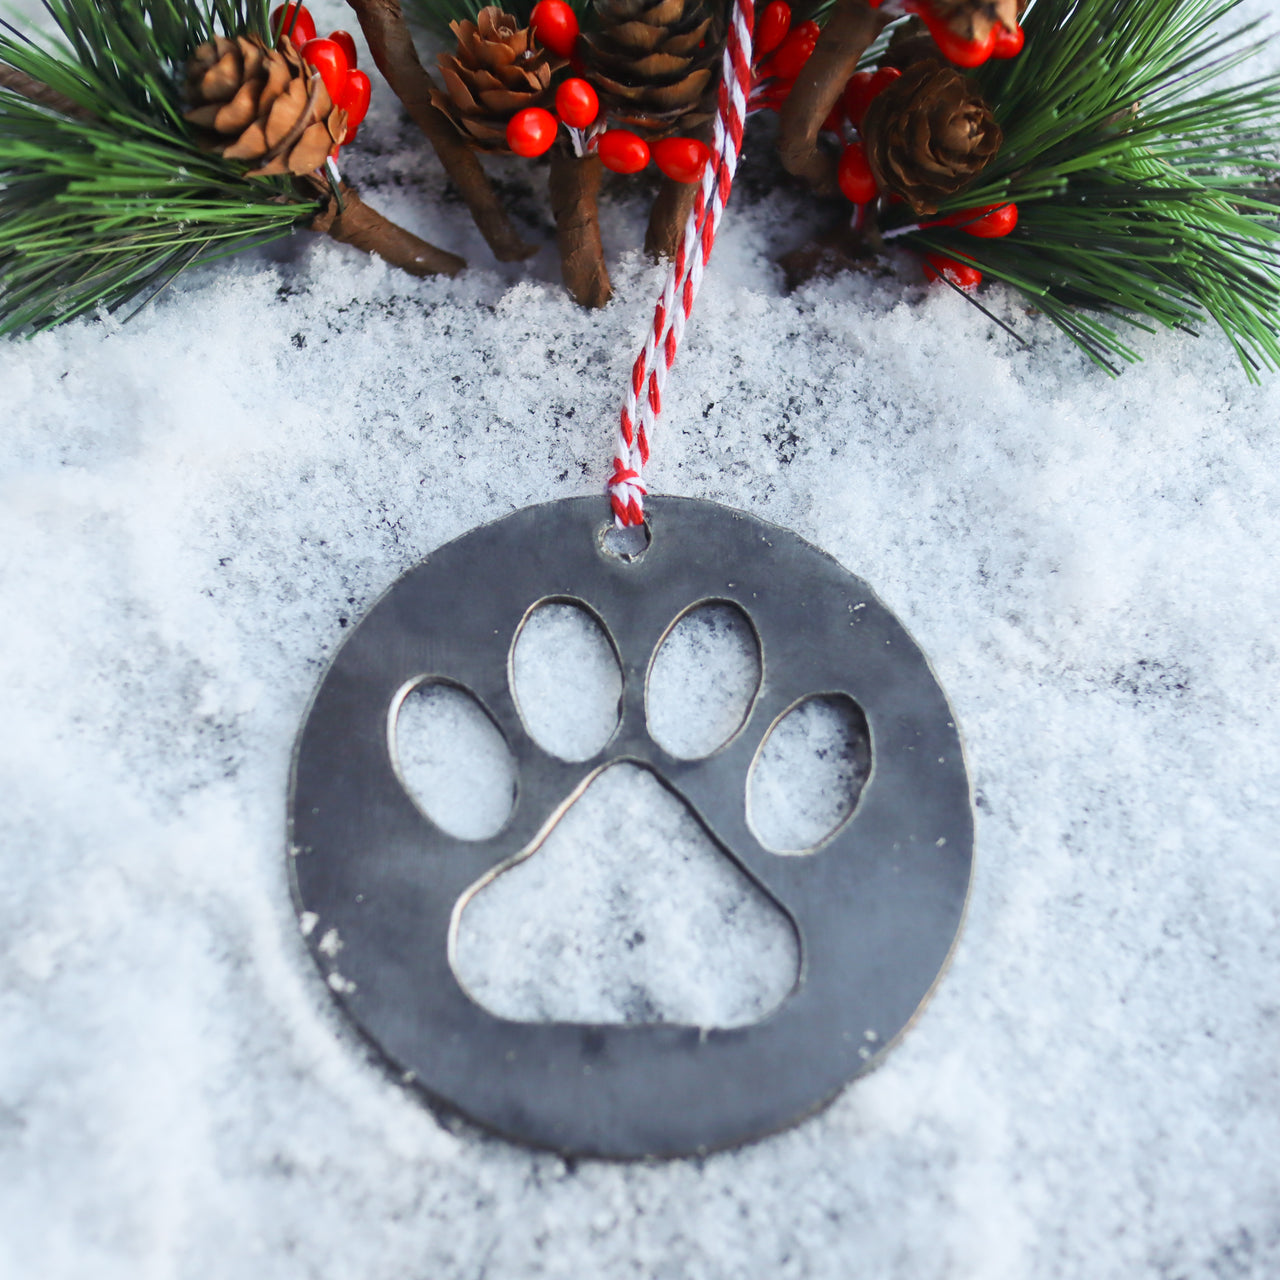 Cat Paw Christmas Ornament - Pet Lover Holiday Stocking Stuffer Gift - Tree Home Decor